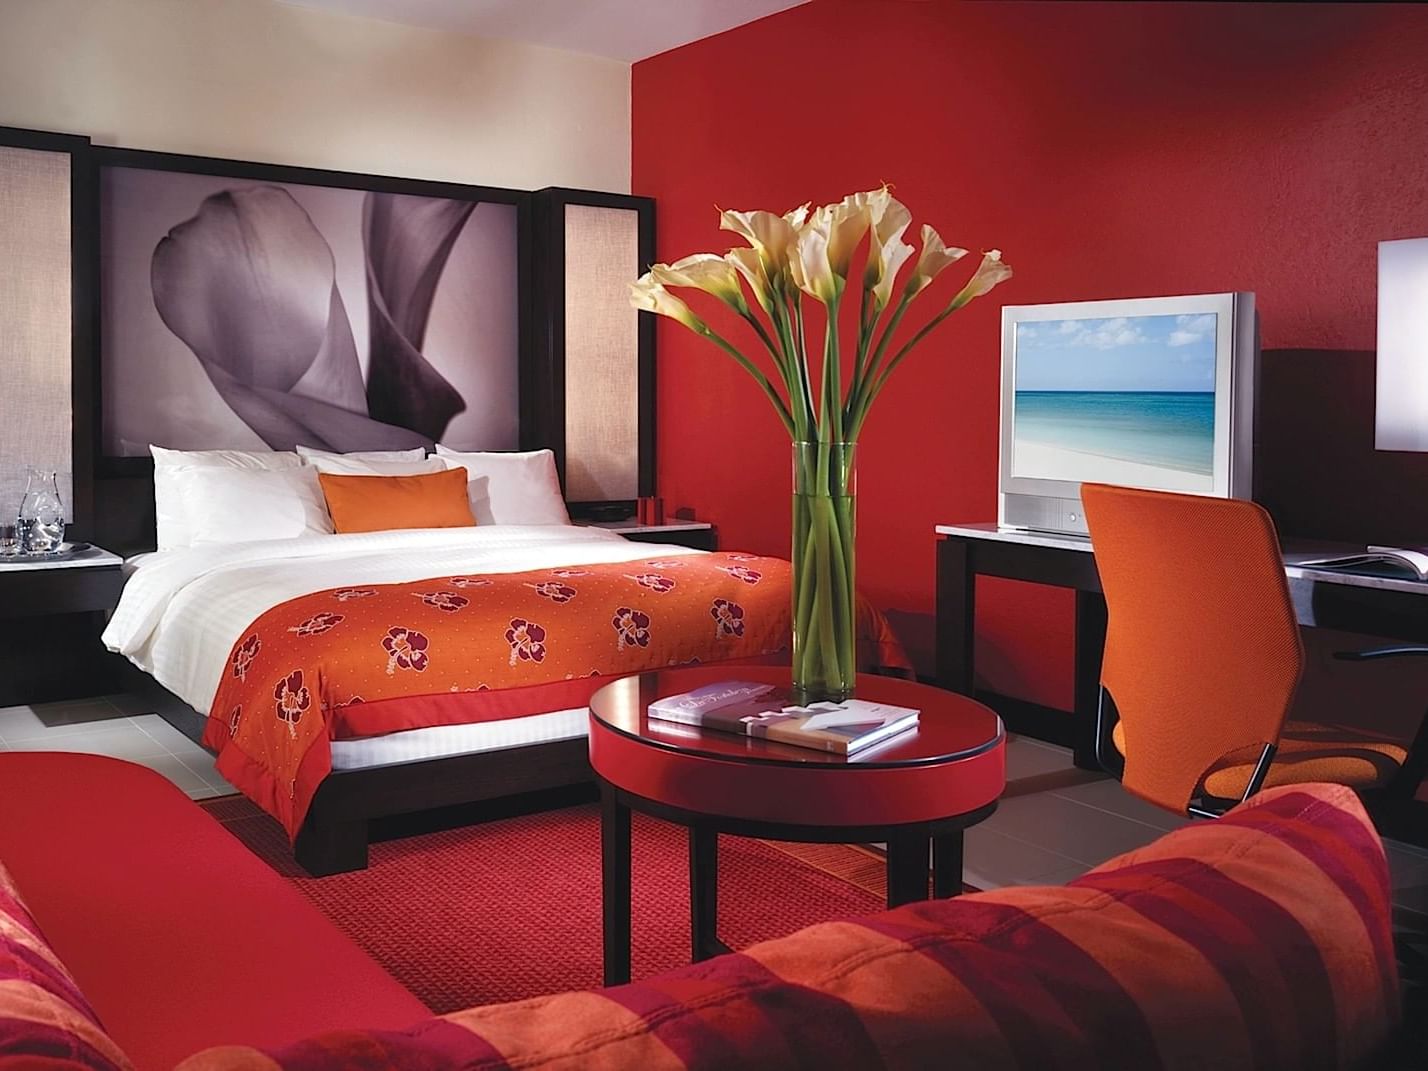 Deluxe Room with a King bed and furniture at Condado Plaza    